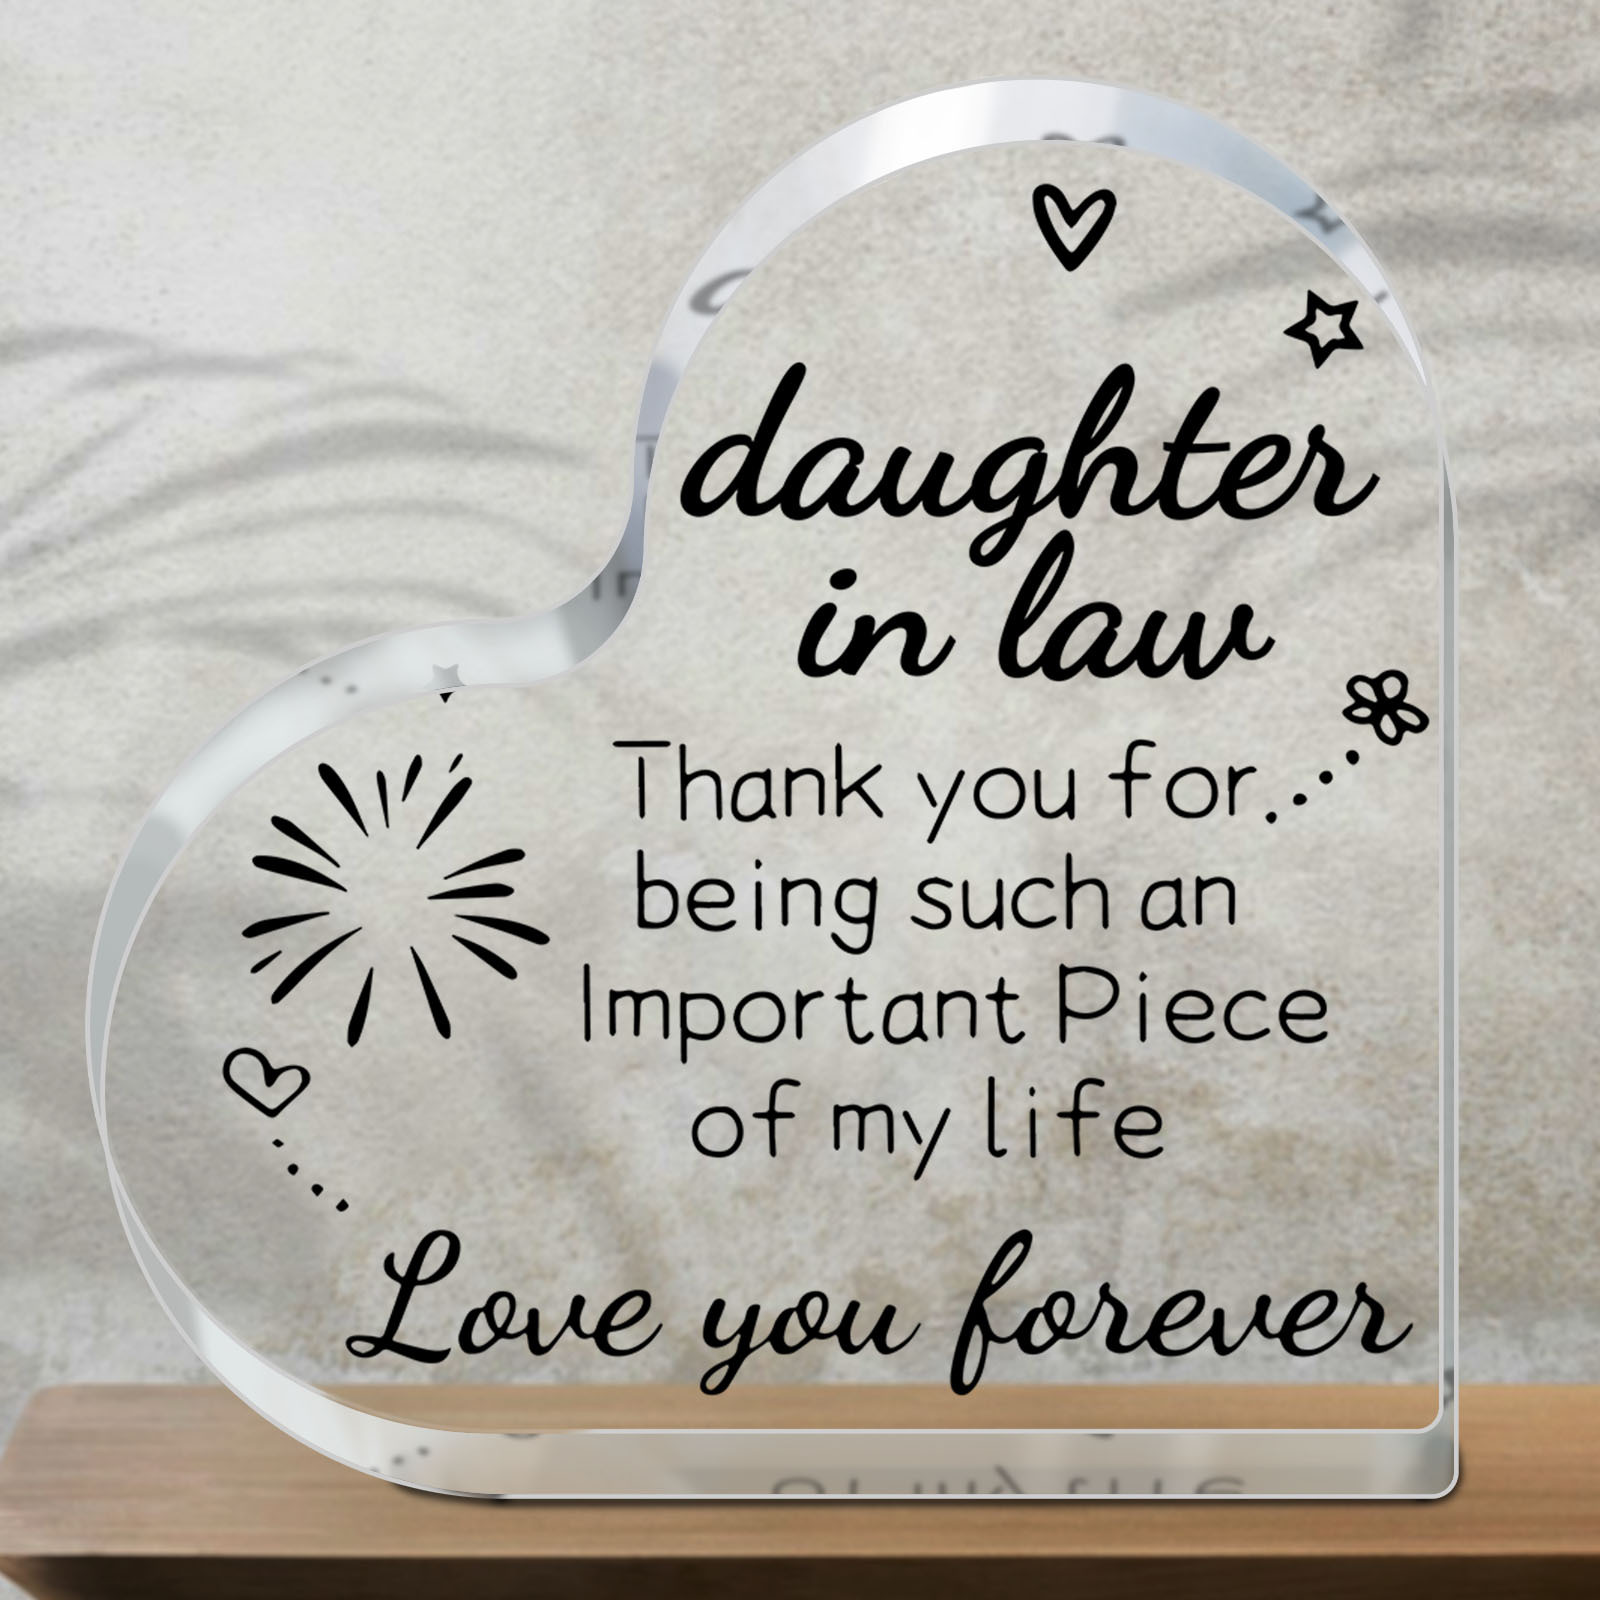 

1pc, Encouragement Signs For Women - Clear Acrylic Desk Decorative Sign For Home Office, Thank You Gift, Art Craft Ornament, Aesthetic Decor, Desk Ornament For Best Friend